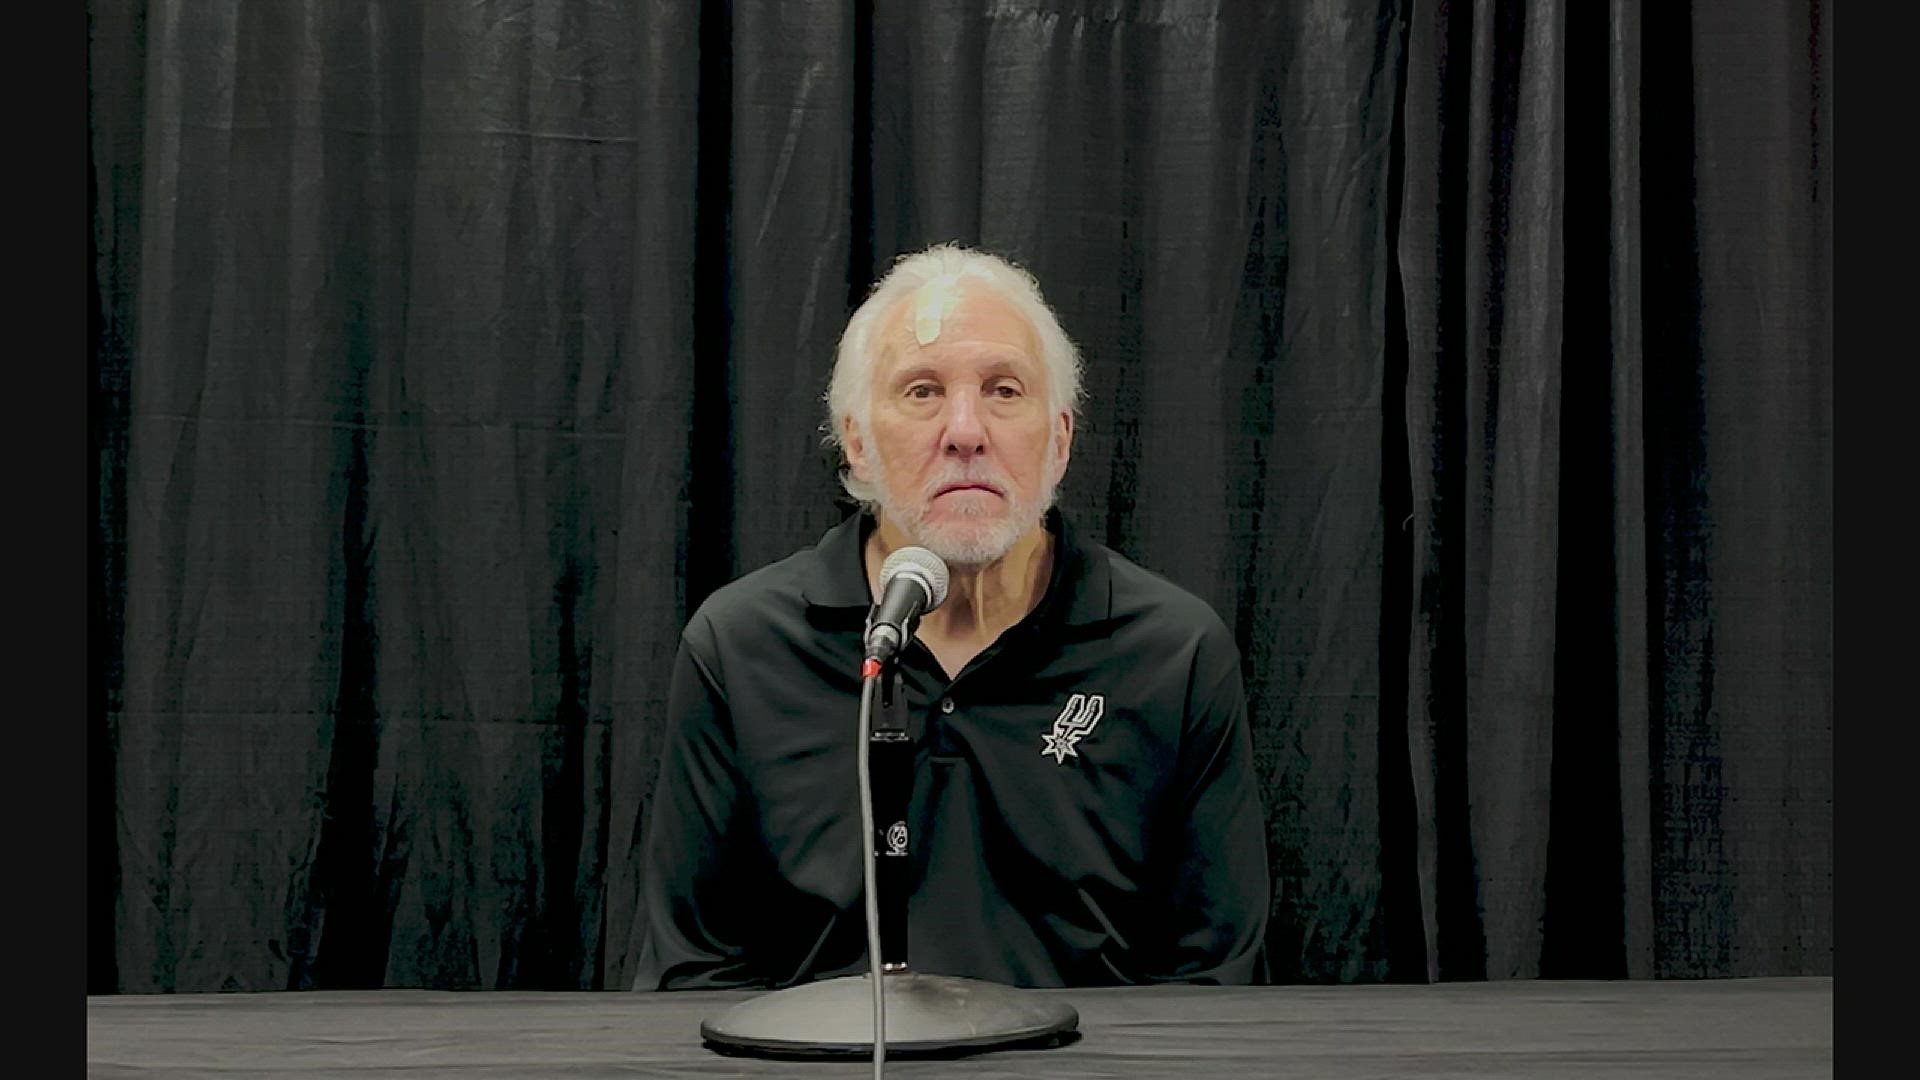 Pop said the team defense was physical and improving with each practice and game.